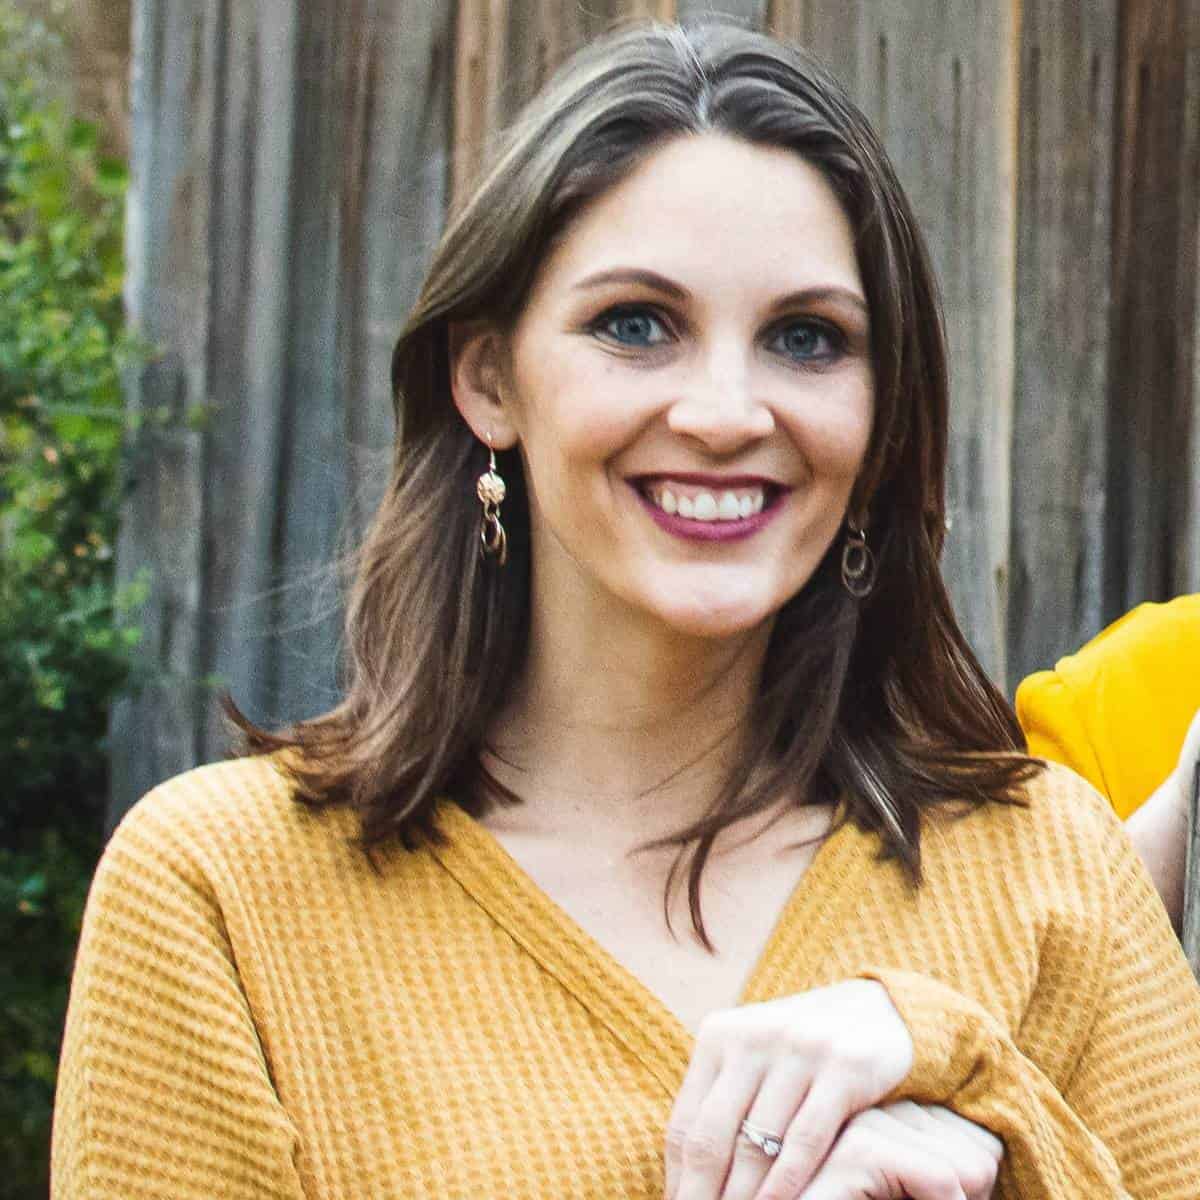 brunette woman in yellow sweater similing